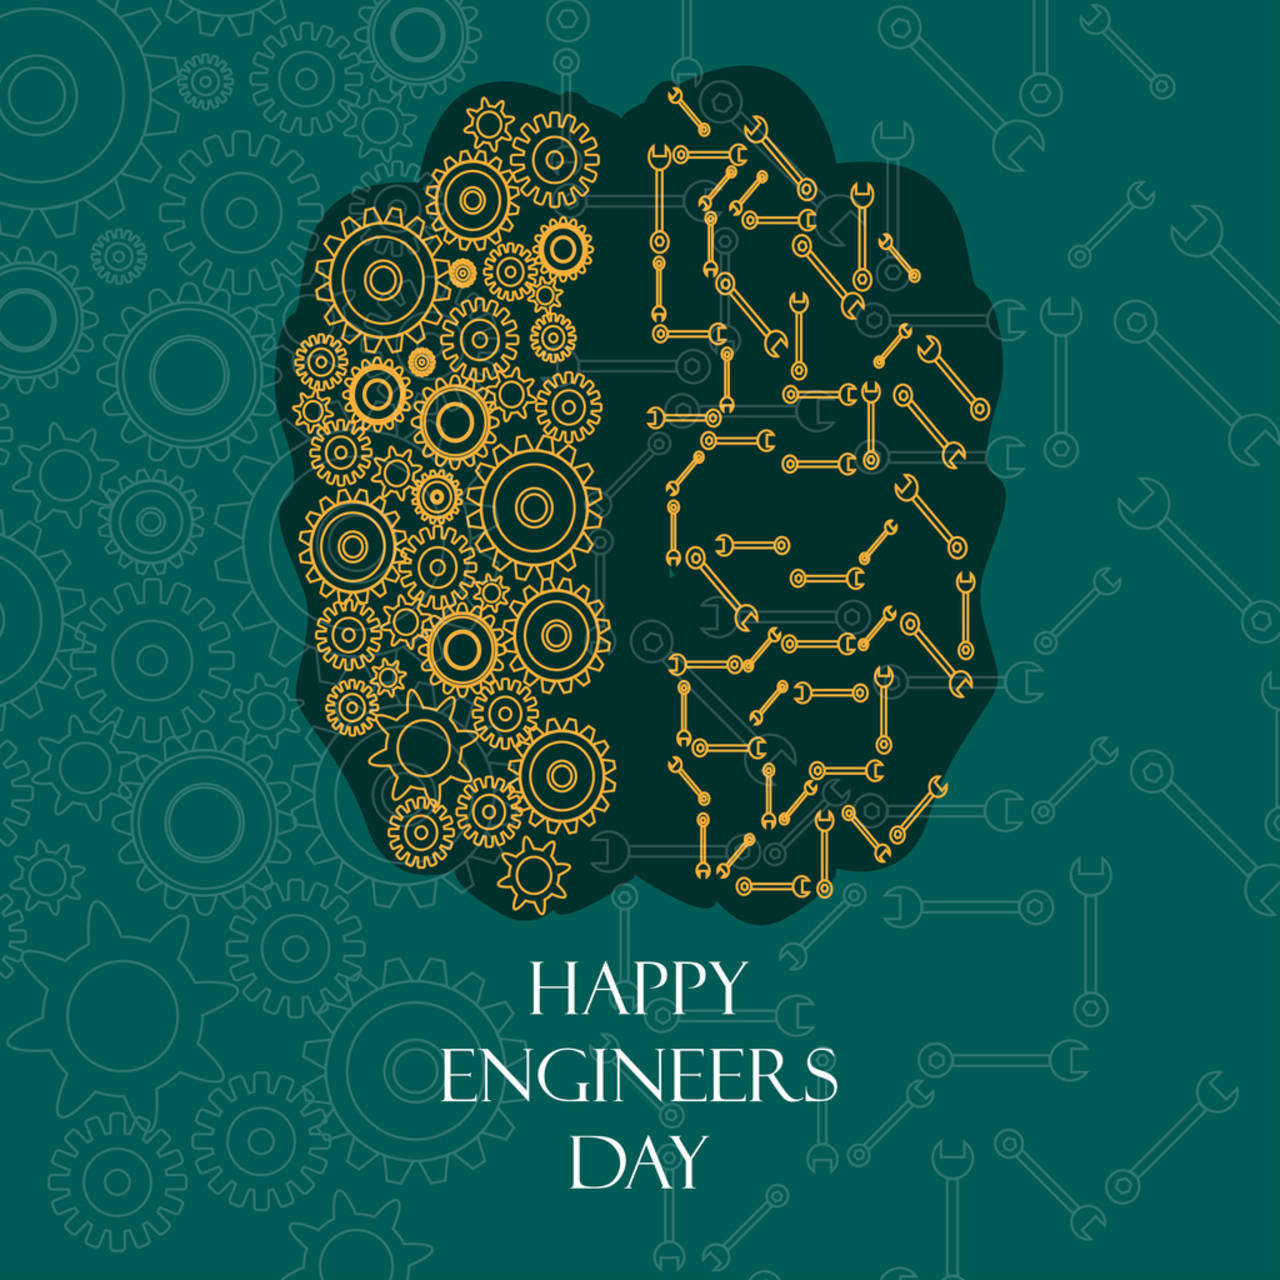 Happy Engineer's Day 2022: Images, Quotes, Wishes, Messages, Cards ...